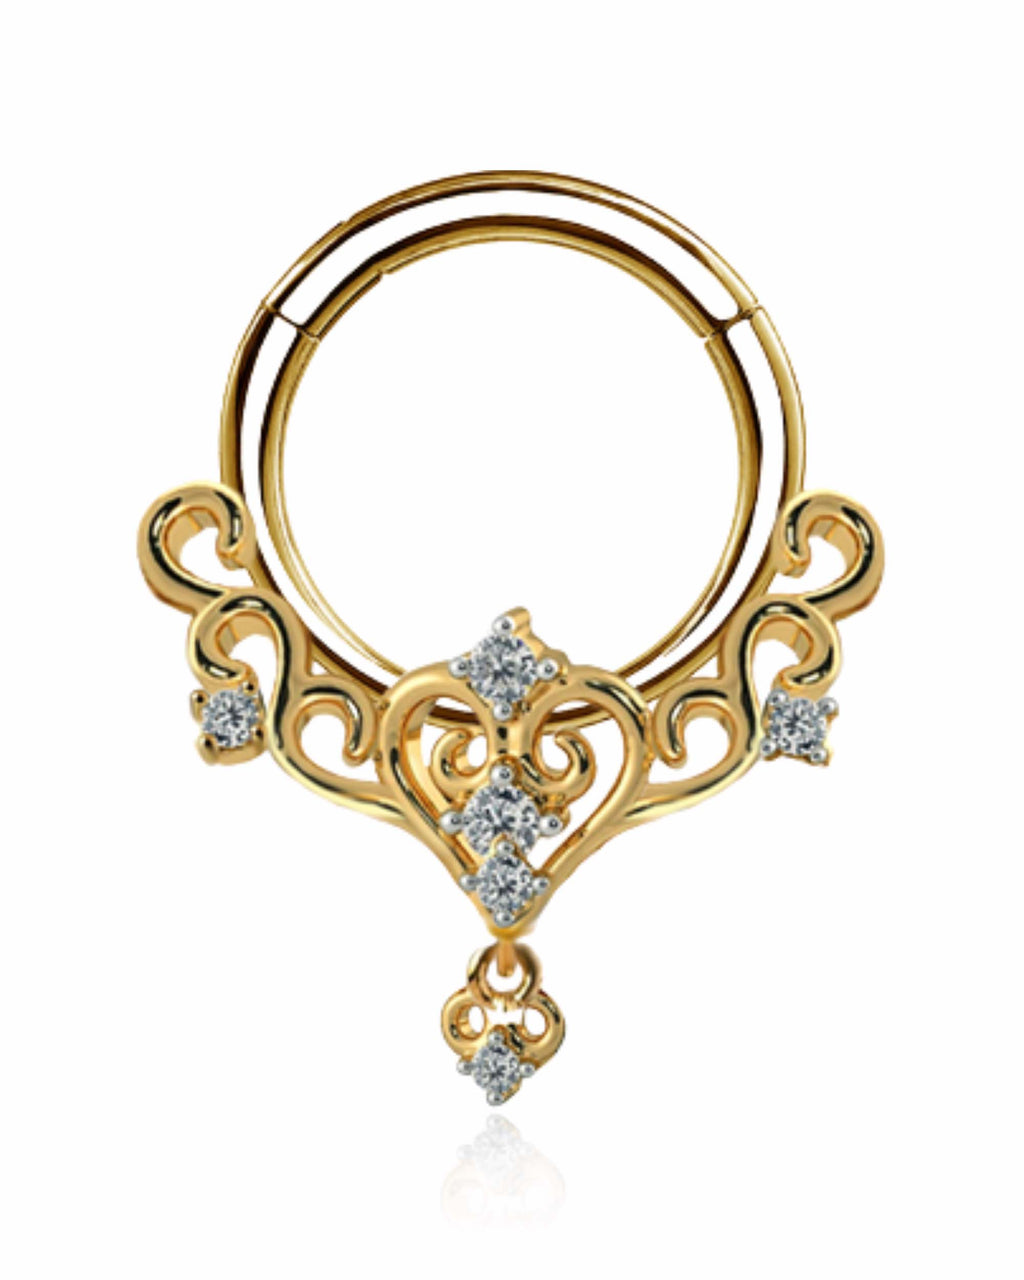 Diamond 'Zip Couture' Necklace, France, Important Jewels: Part II, 2021